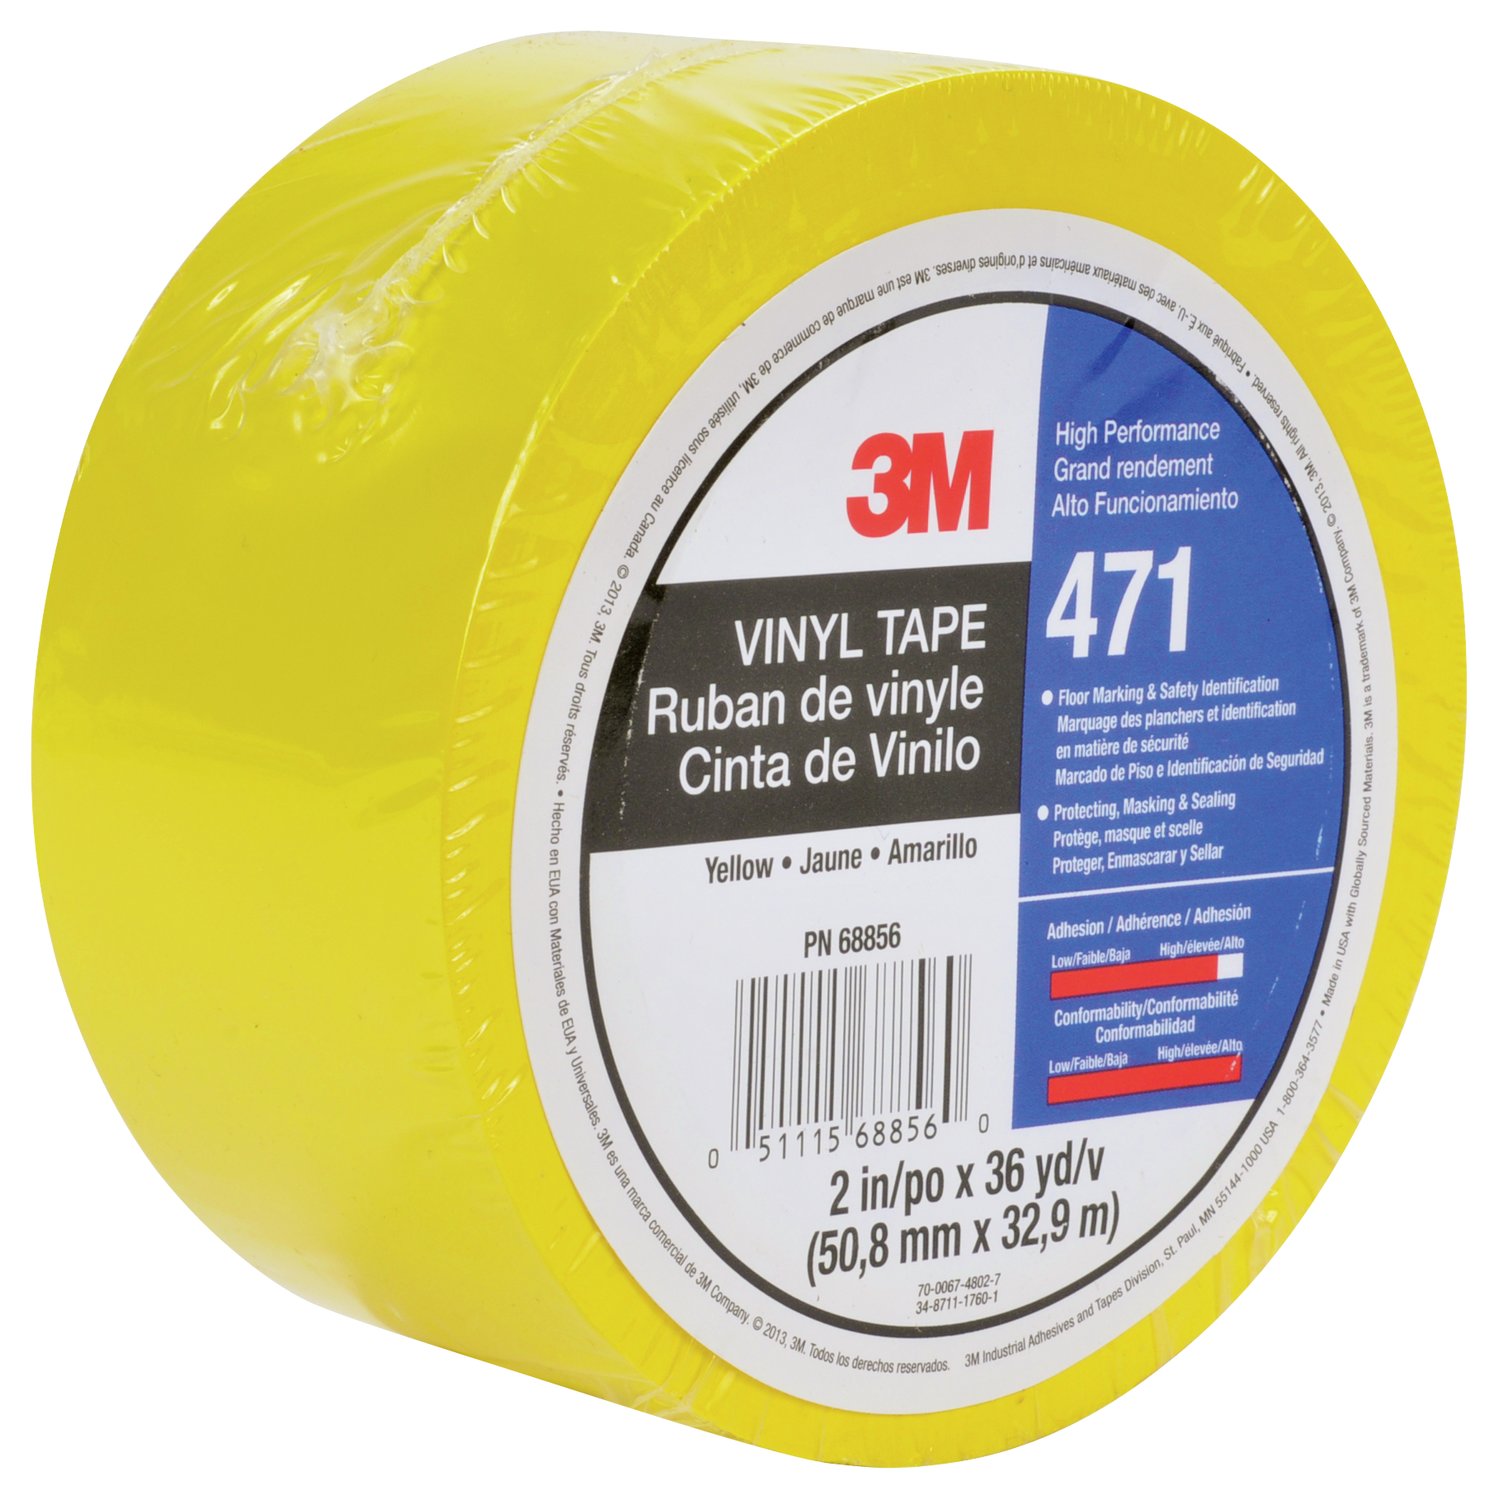 3M 165 Color Code Tape, 3/4'' x 60', Yellow, 10 Pack